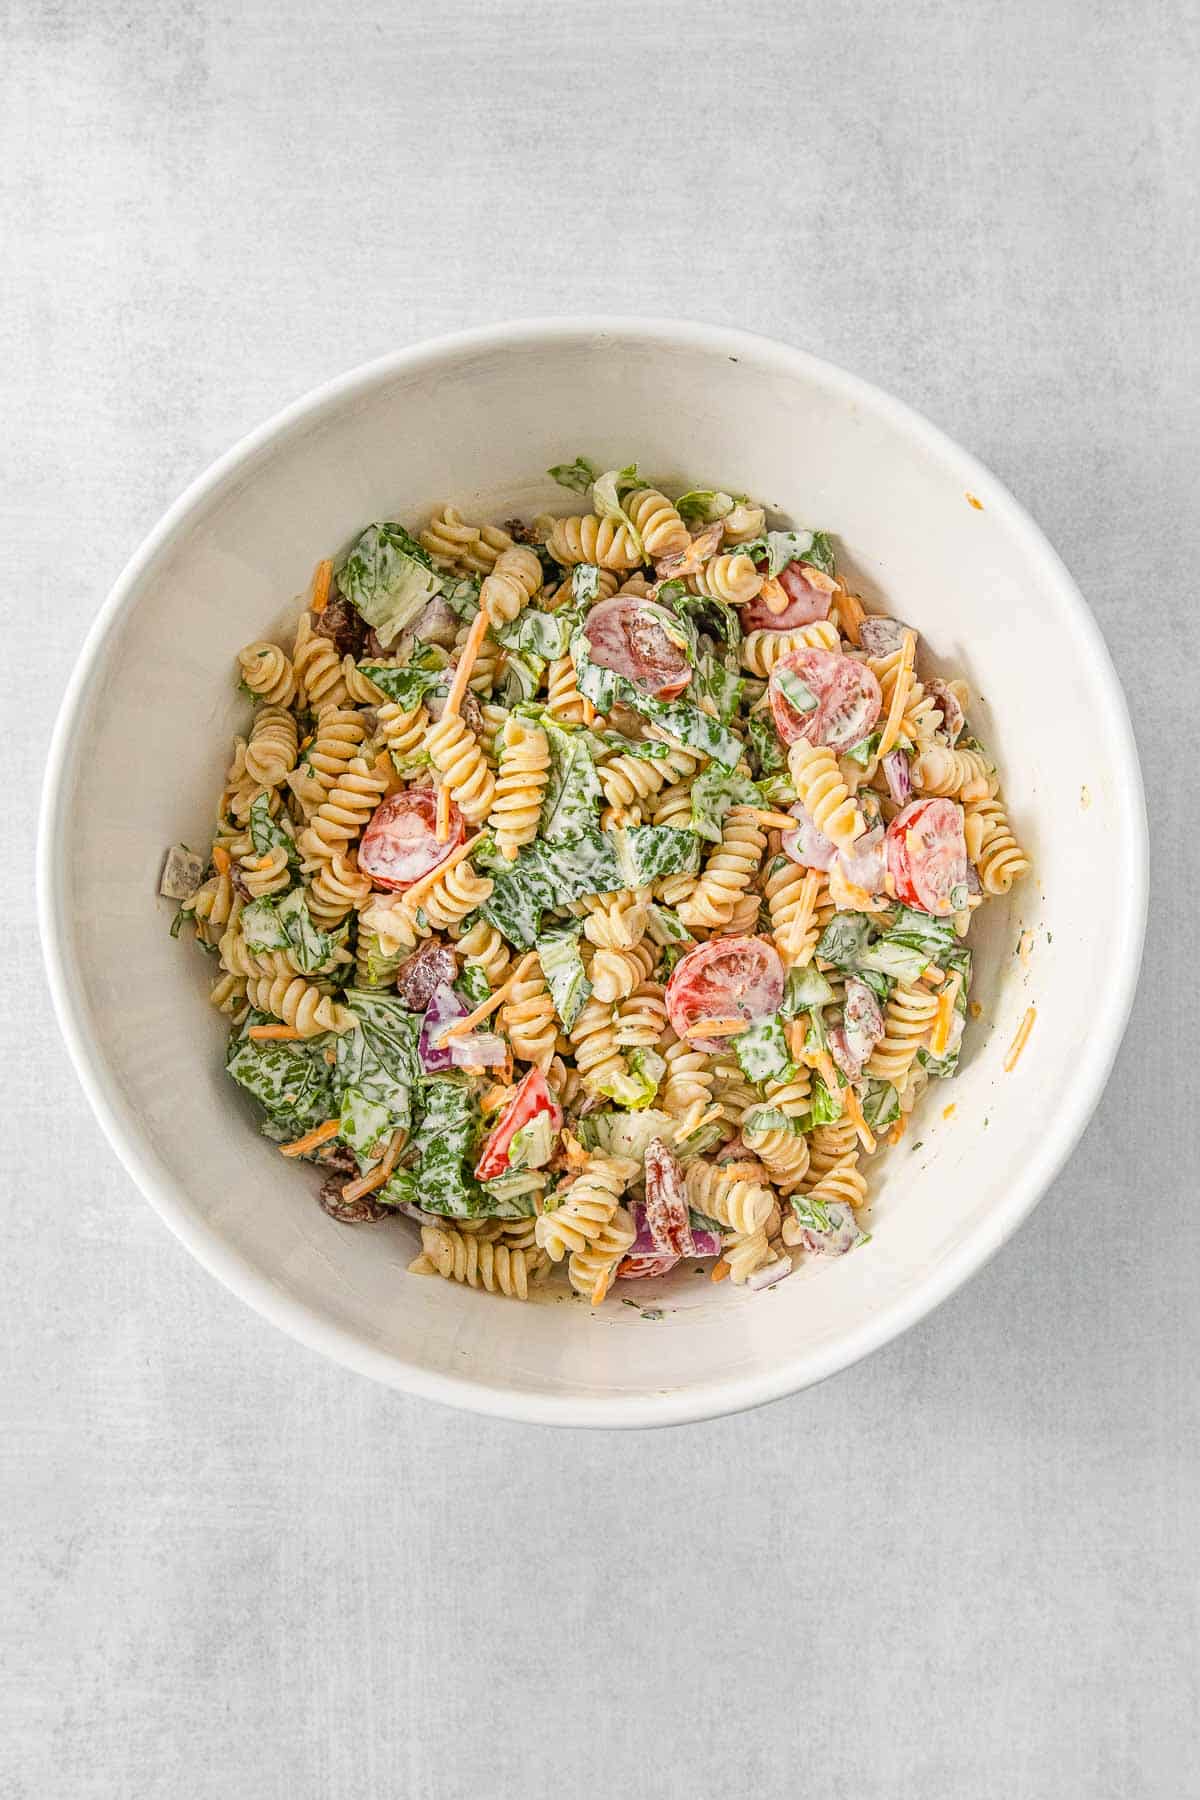 Pasta salad ingredients mixed with salad dressing ingredients in a large white mixing bowl.